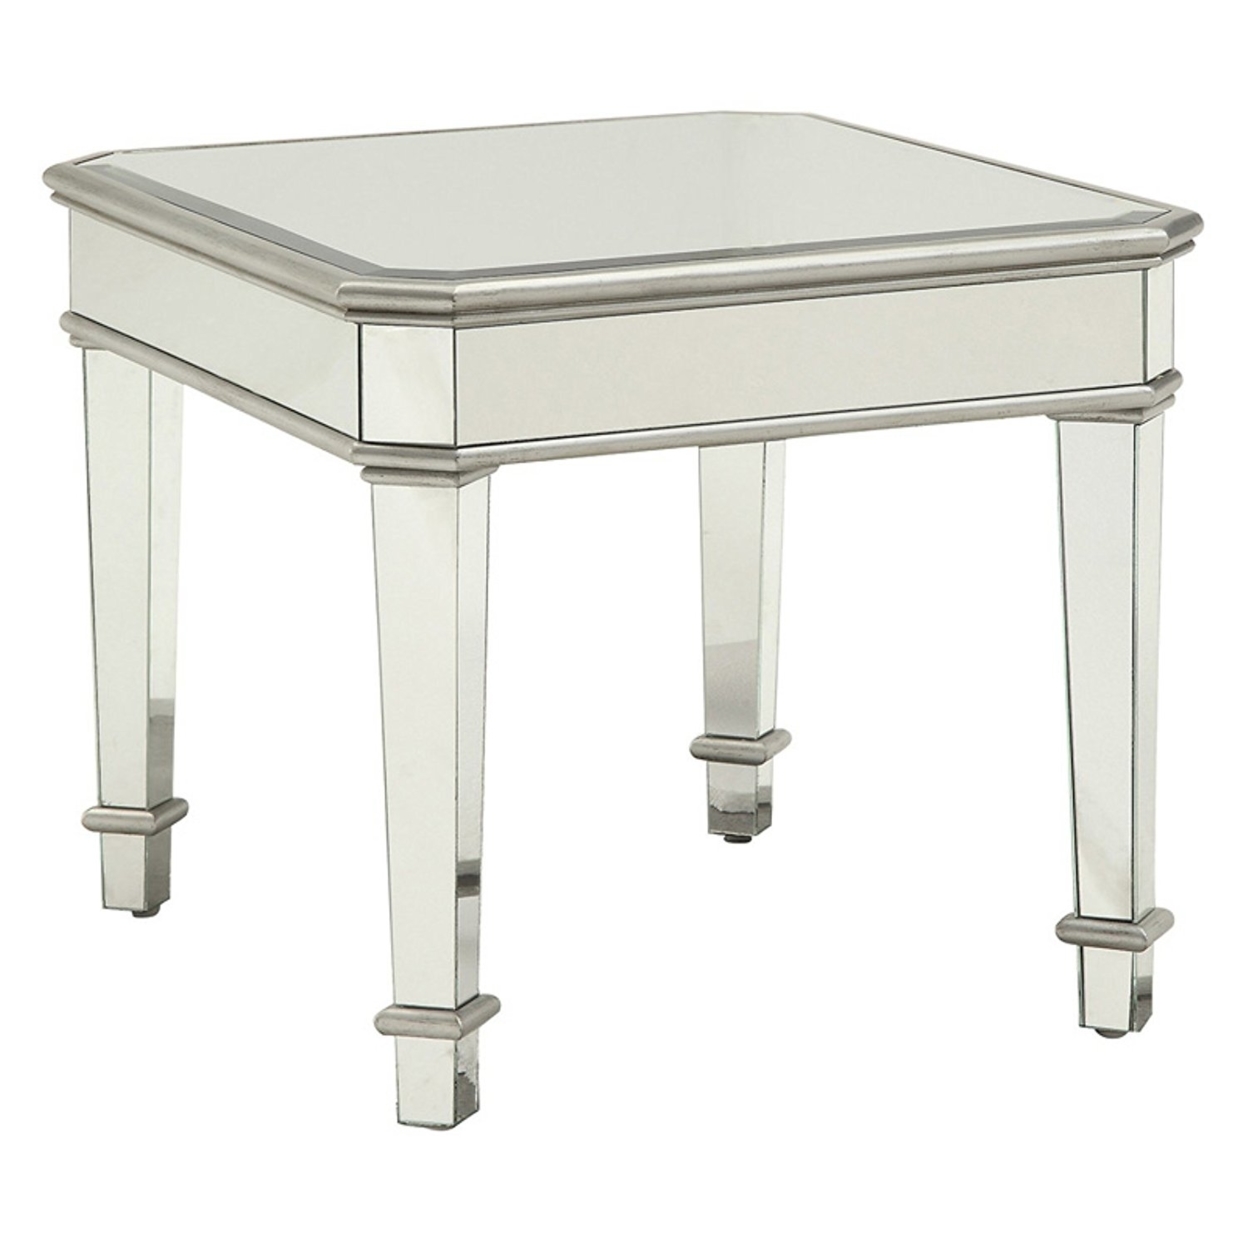 Mirrored Transitional Style Wooden End Table With Beveled Edges, Silver- Saltoro Sherpi